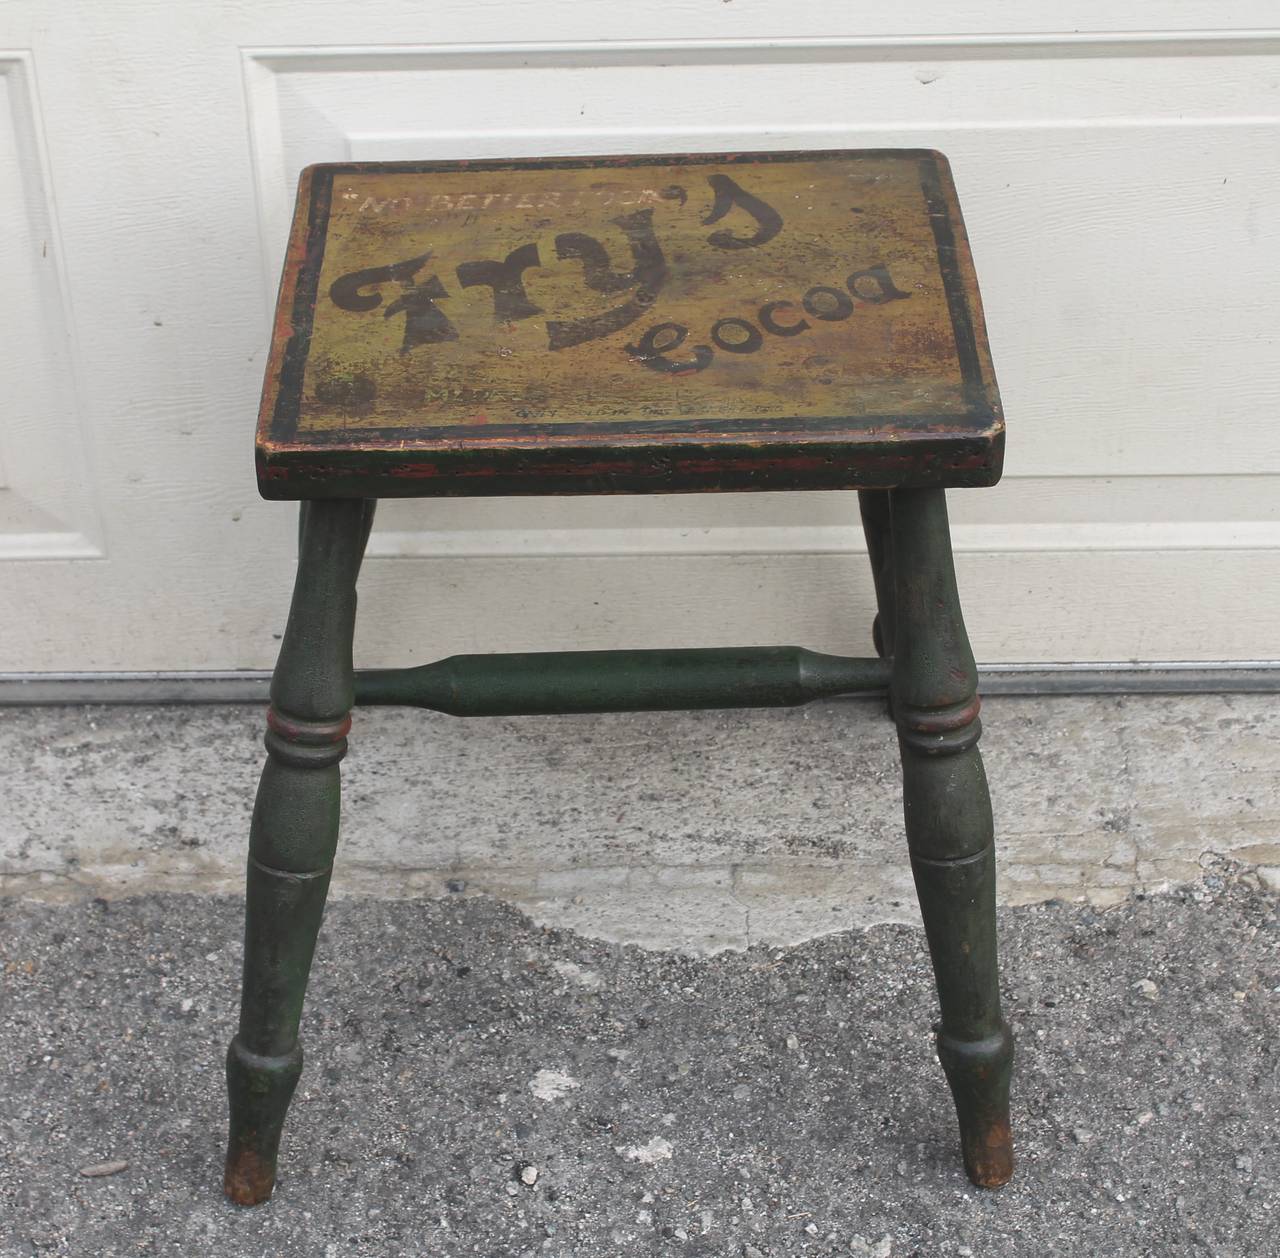 Adirondack 19th Century Fry's Cocoa Advertising Bench in Original Paint